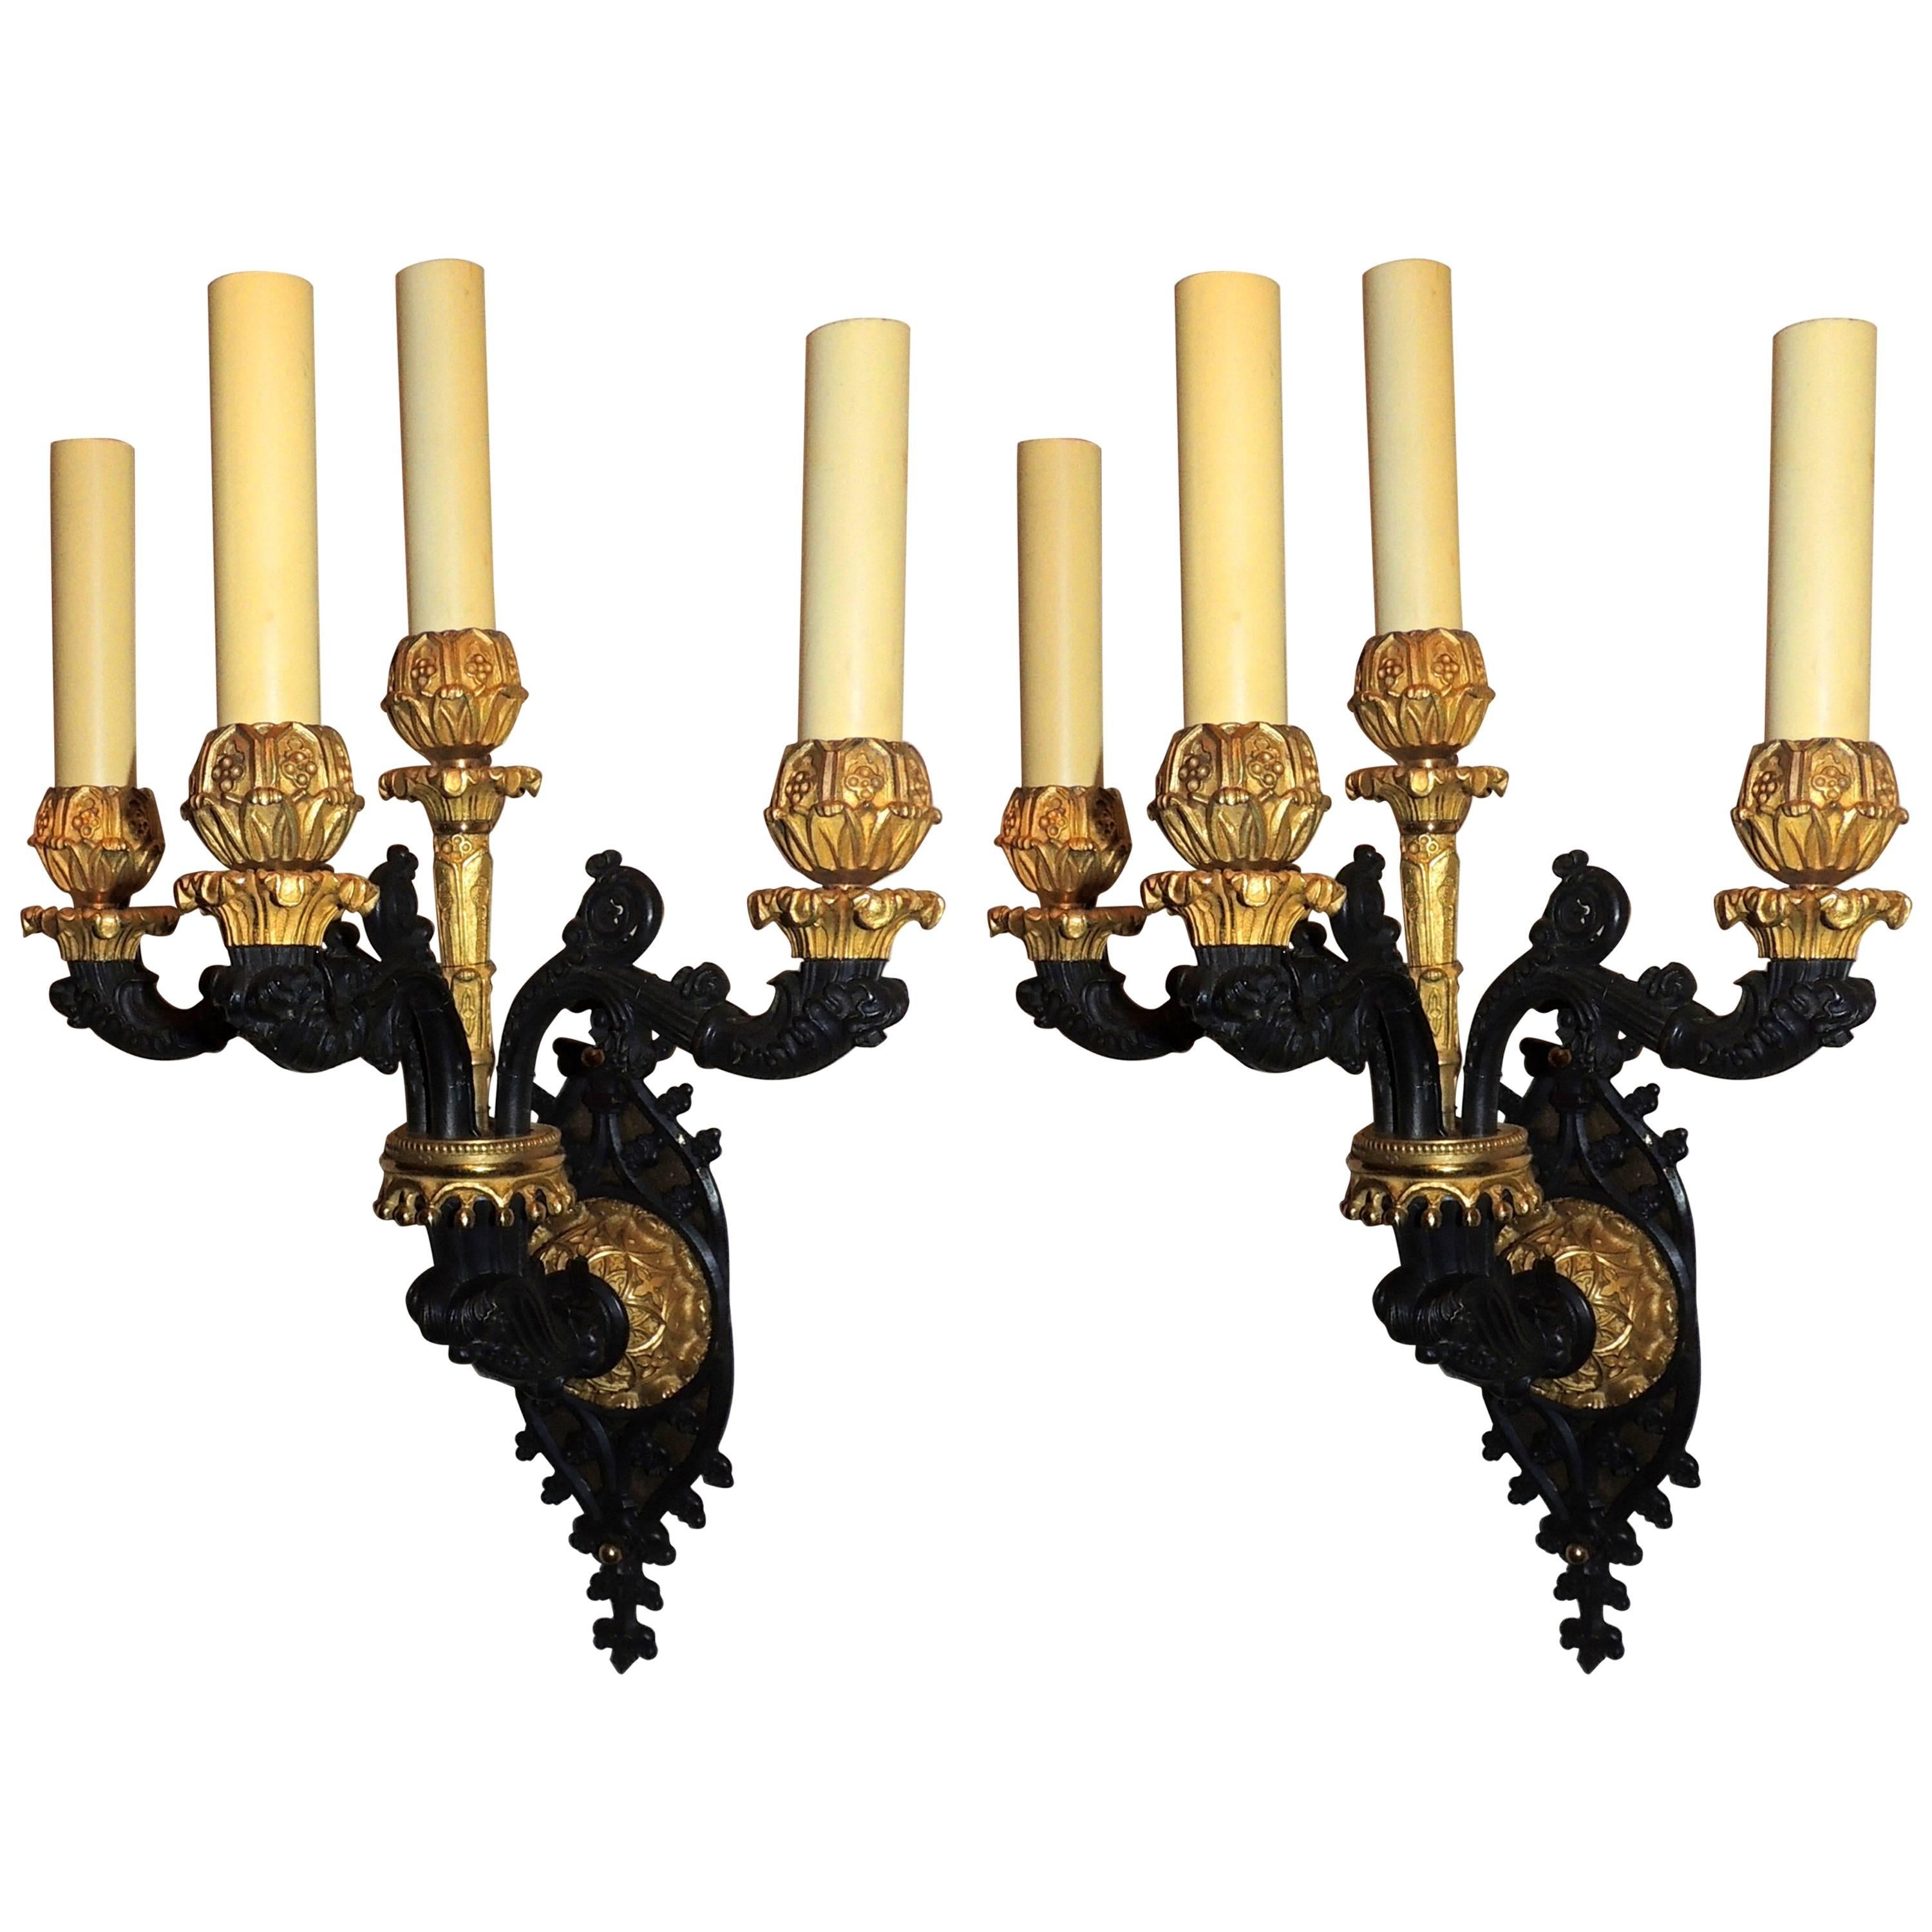 Pair of French Empire Neoclassical Regency Gilt Bronze Patinated Sconces